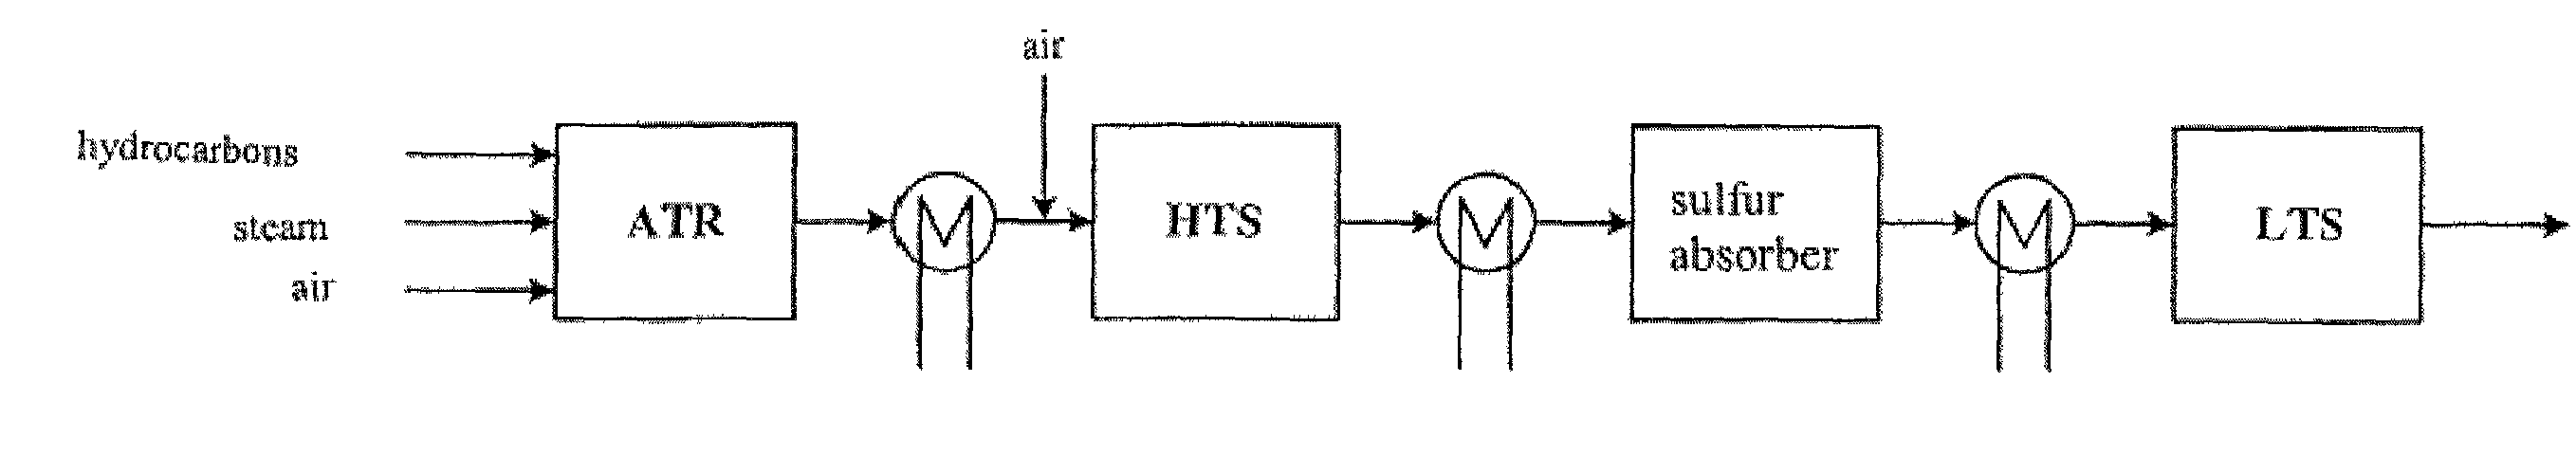 Process for preparing a low-sulfur reformate gas for use in a fuel cell system